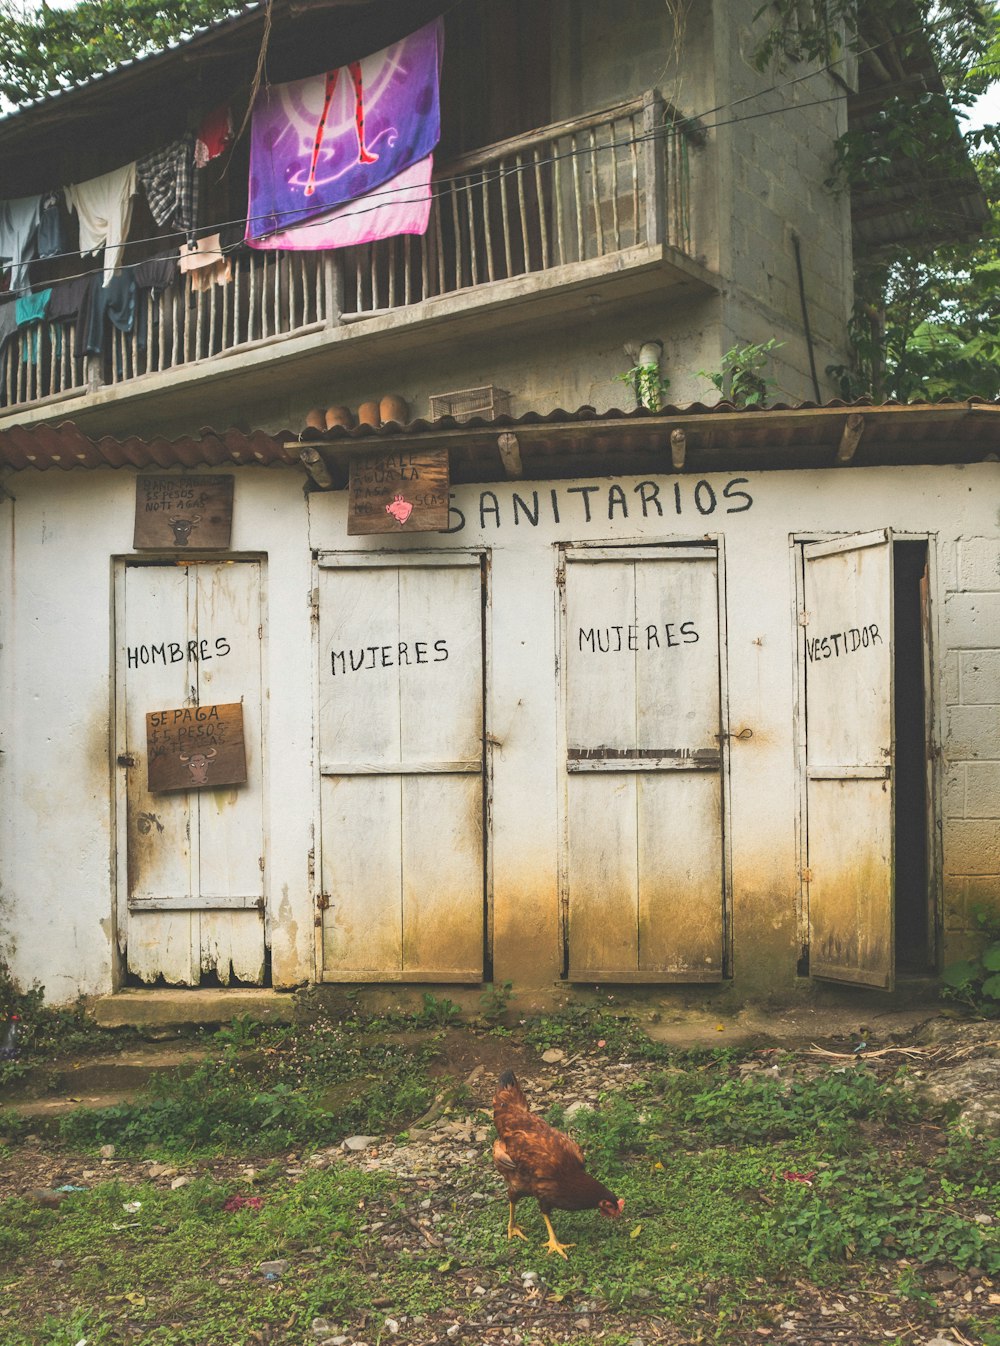 a chicken standing in front of a run down building